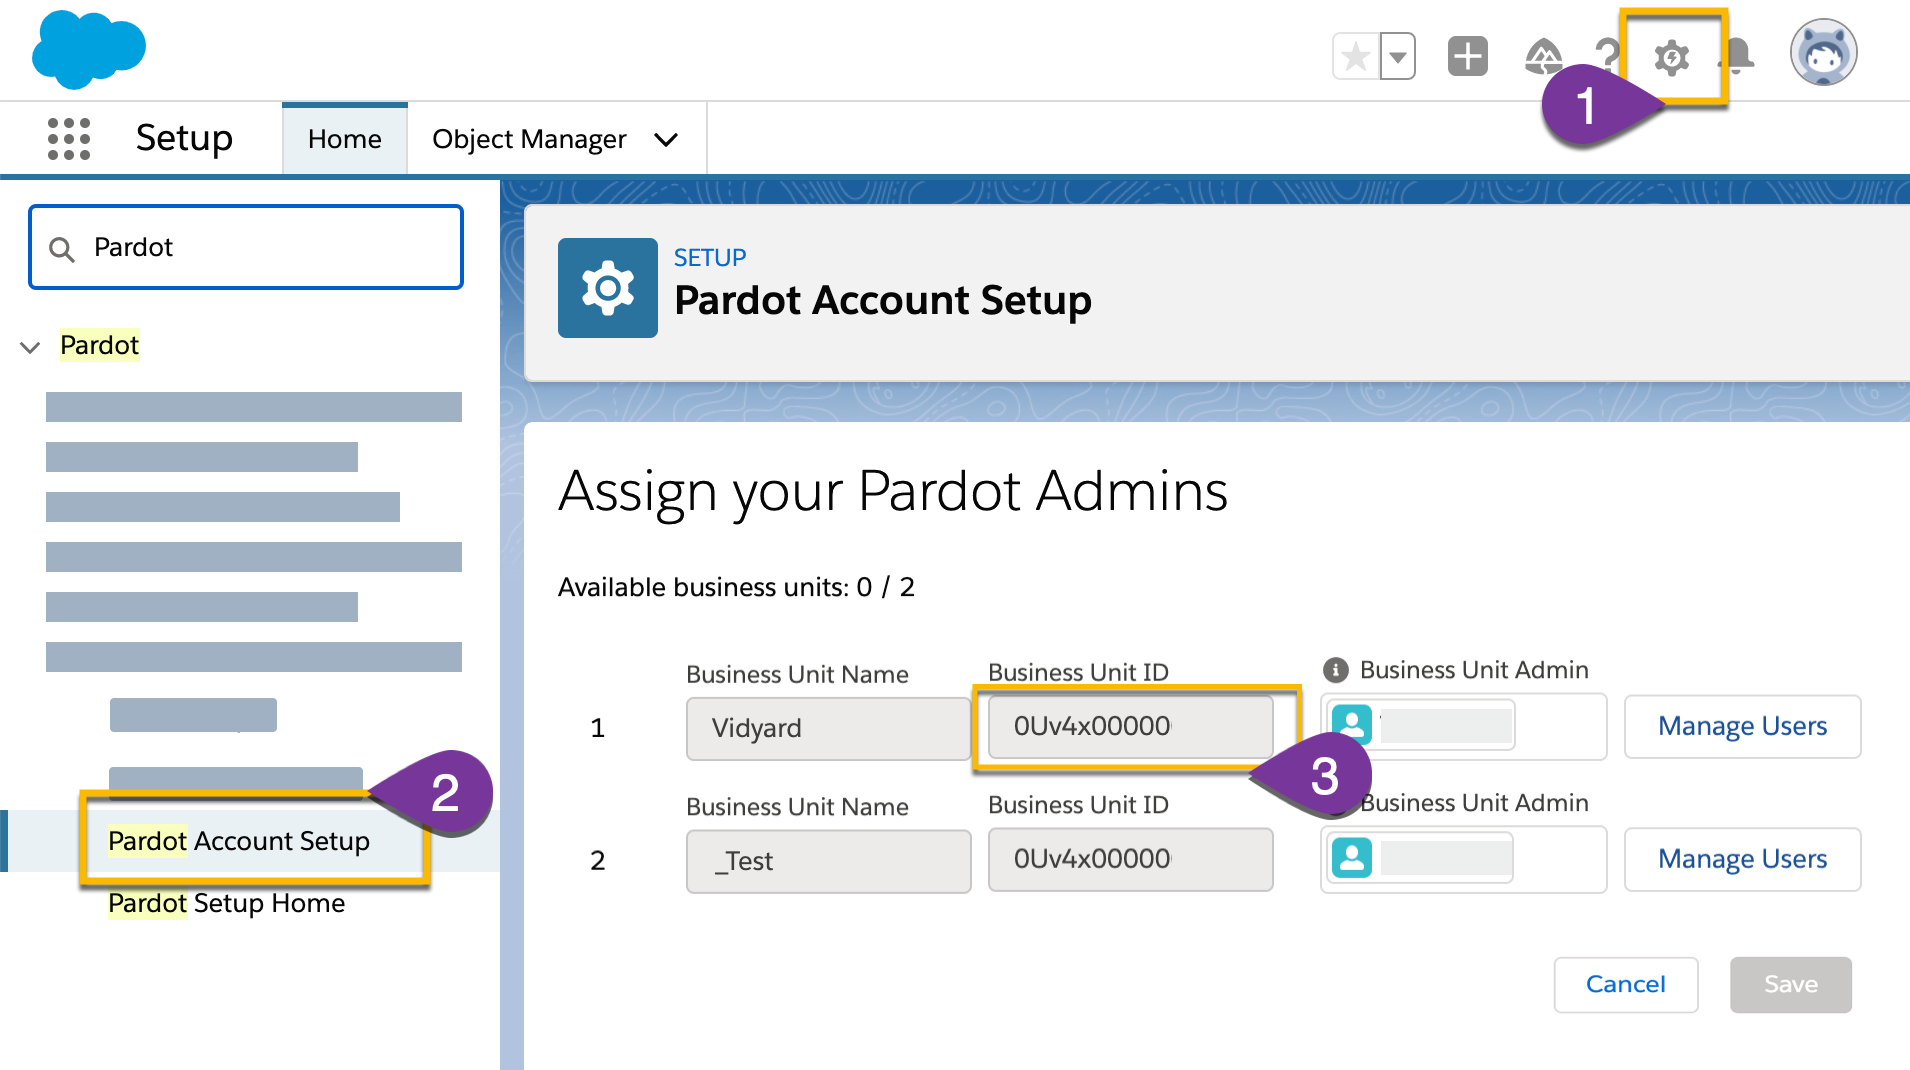 Copying a Business Units ID from Pardot Account Setup in Salesforce